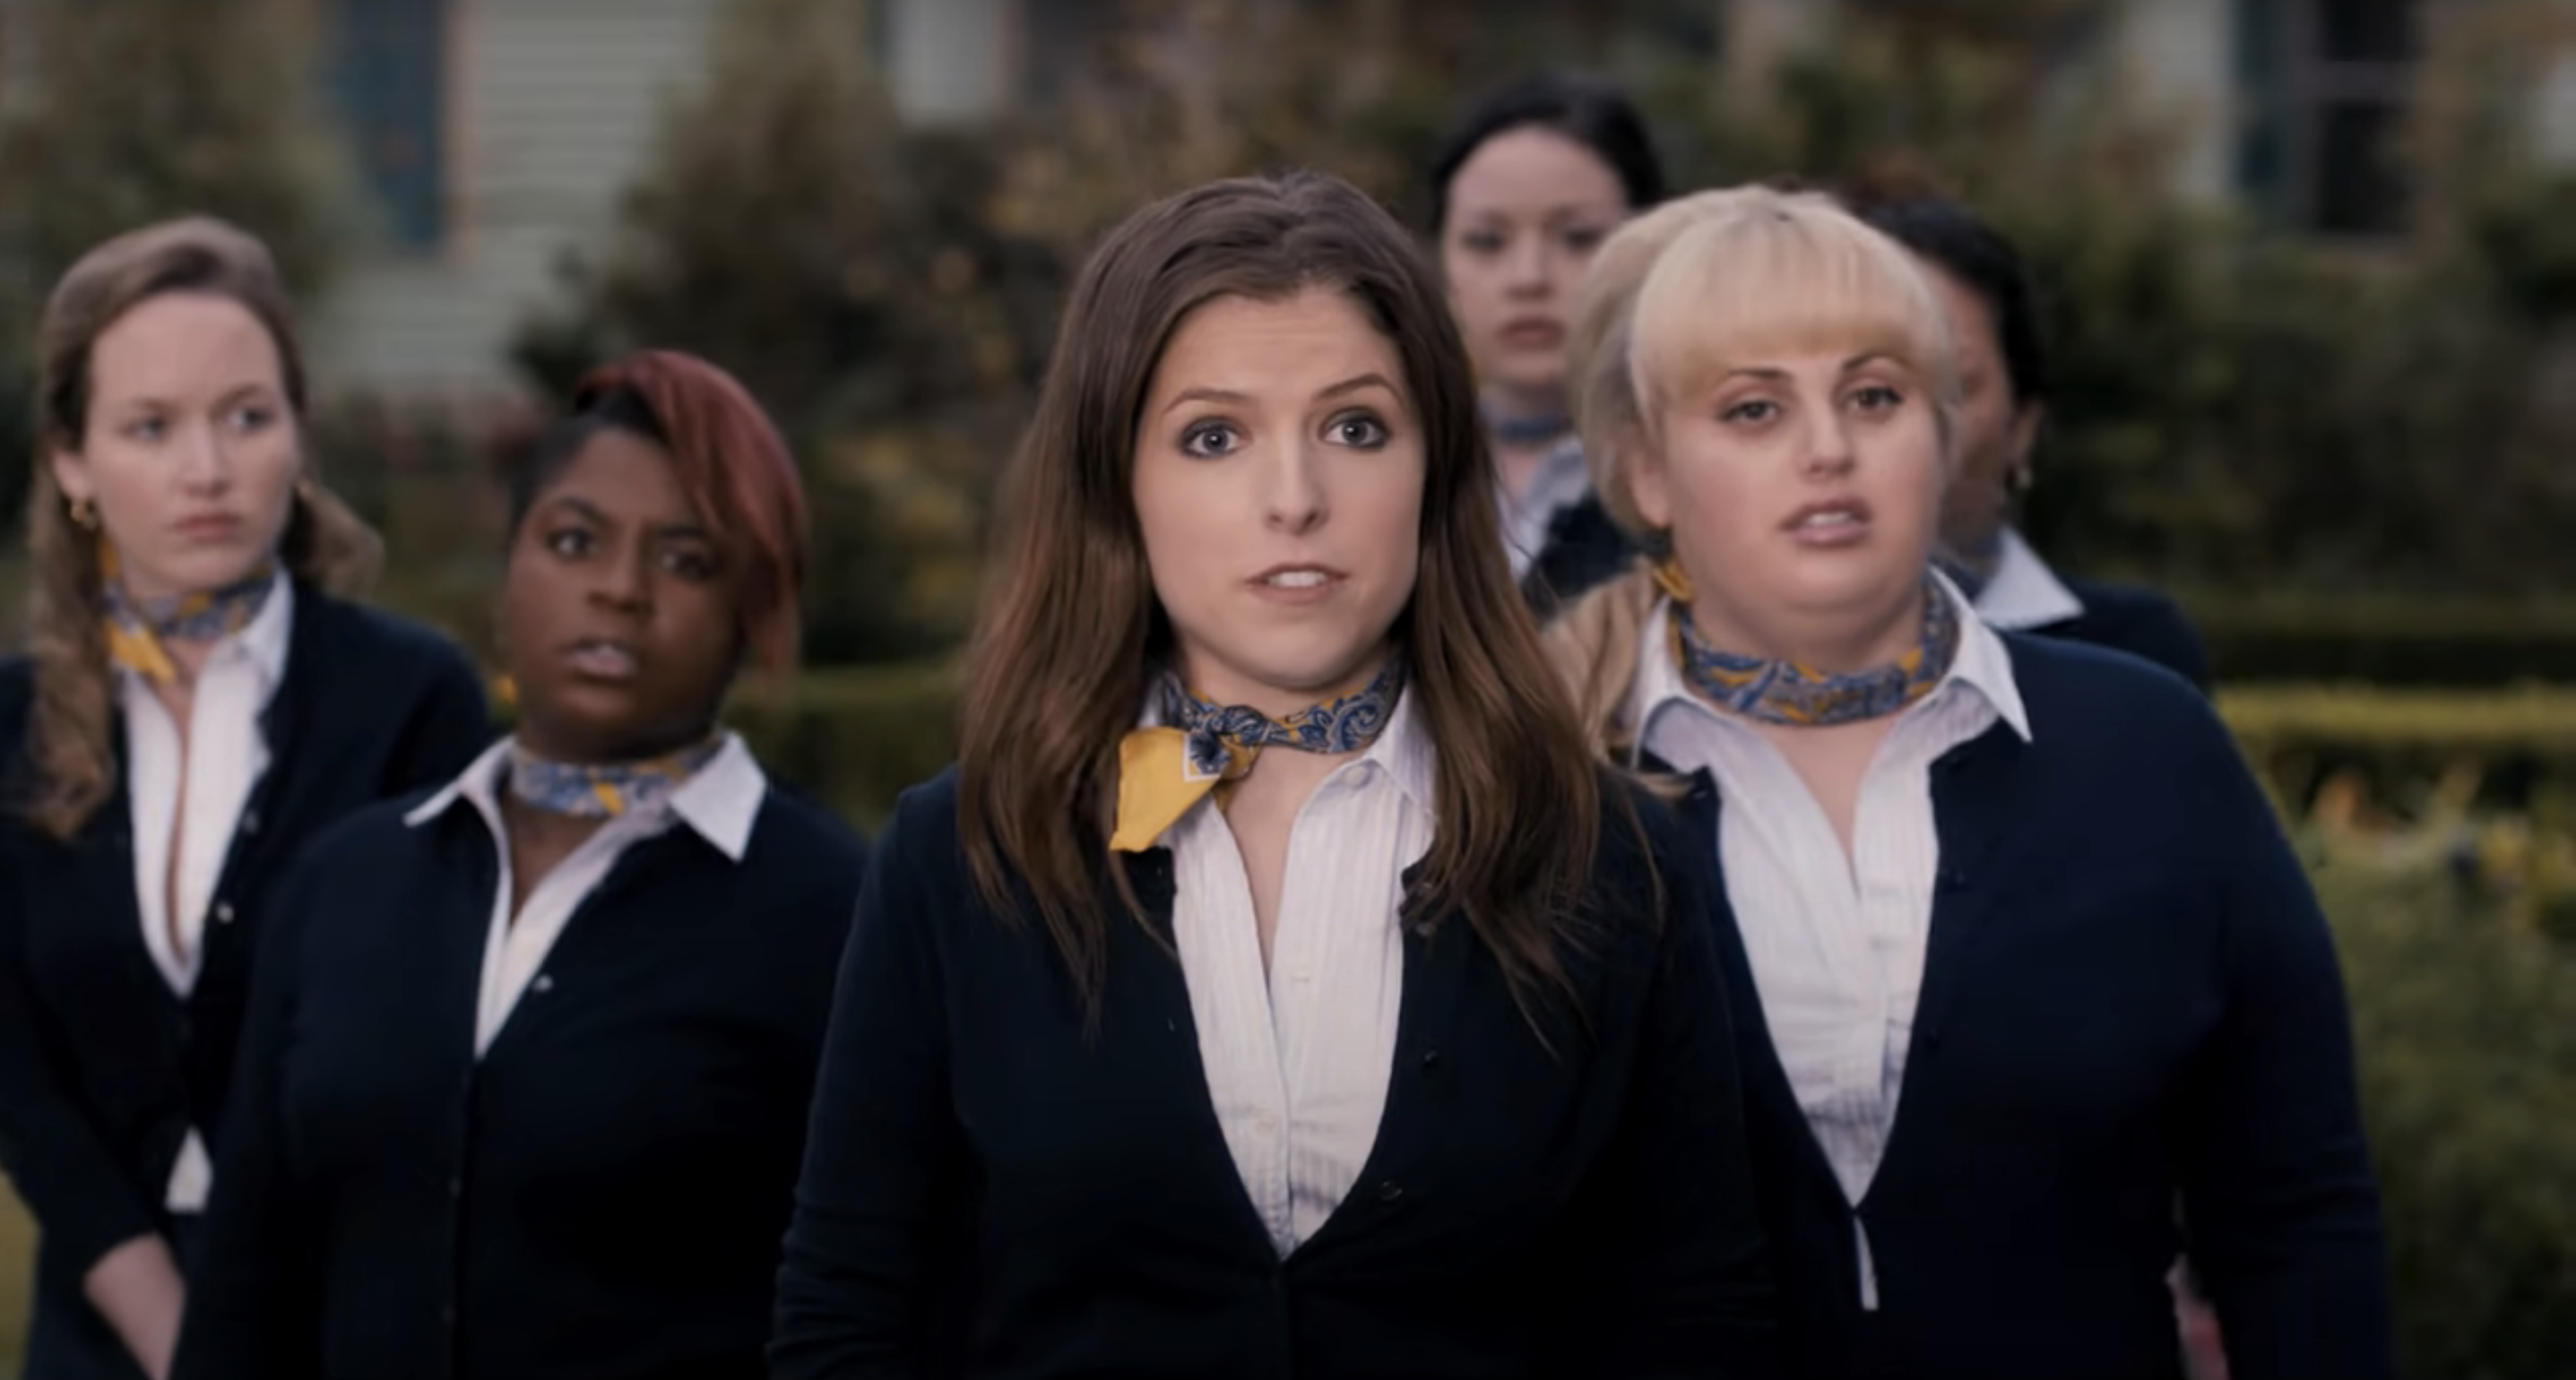 Anna Kendrick, Rebel Wilson and other &quot;pitch perfect&quot; cast in acapella uniform